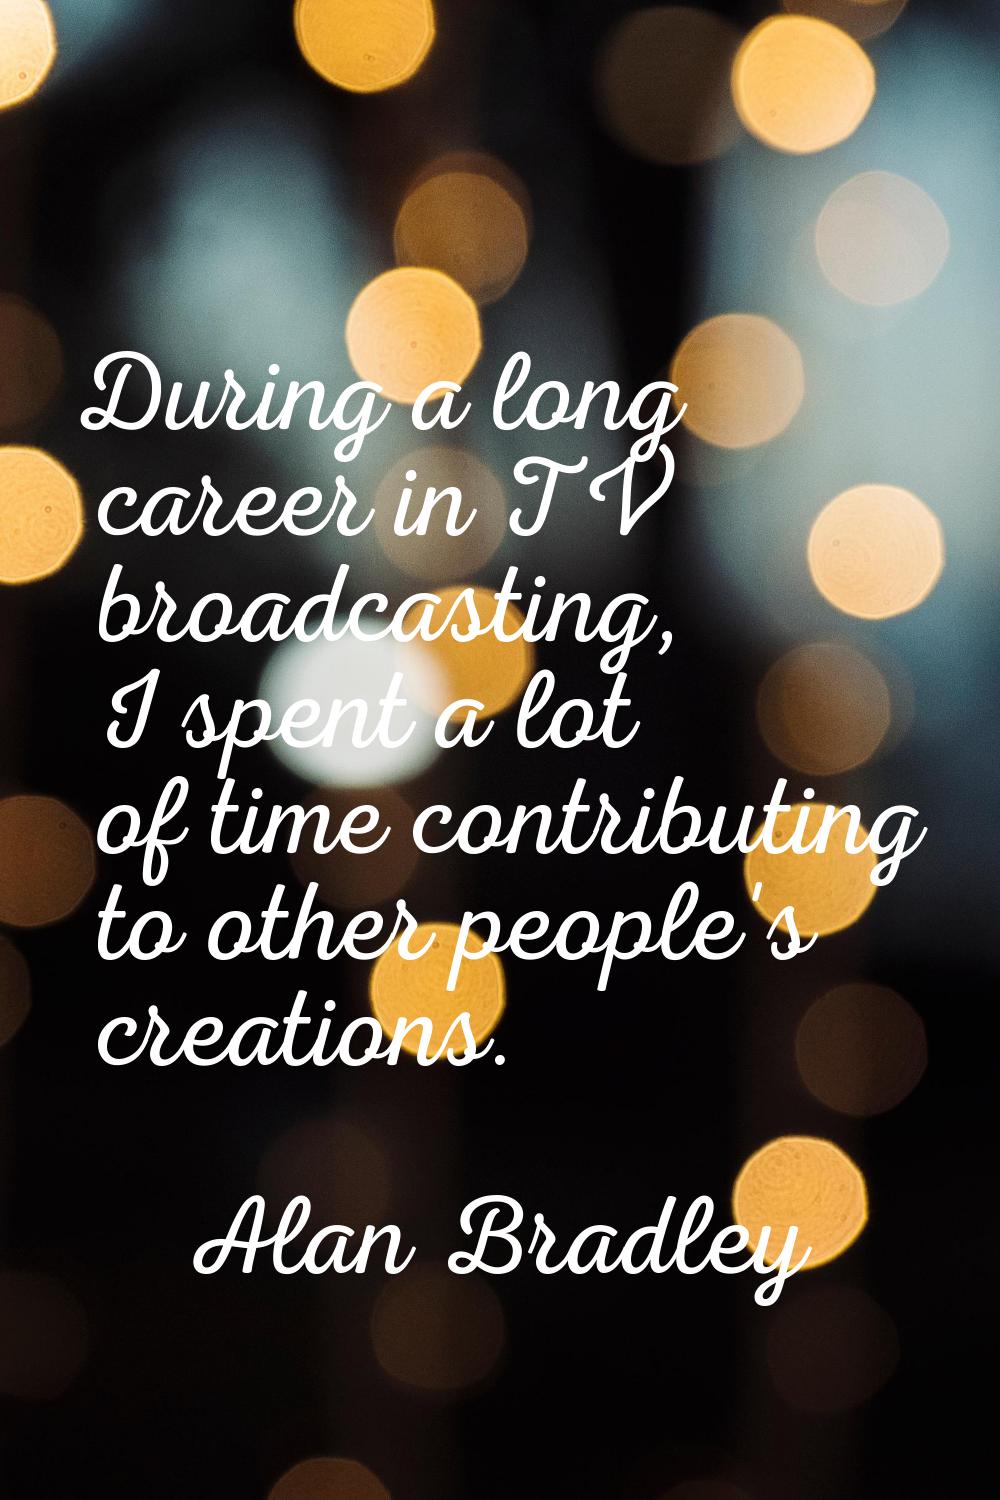 During a long career in TV broadcasting, I spent a lot of time contributing to other people's creat